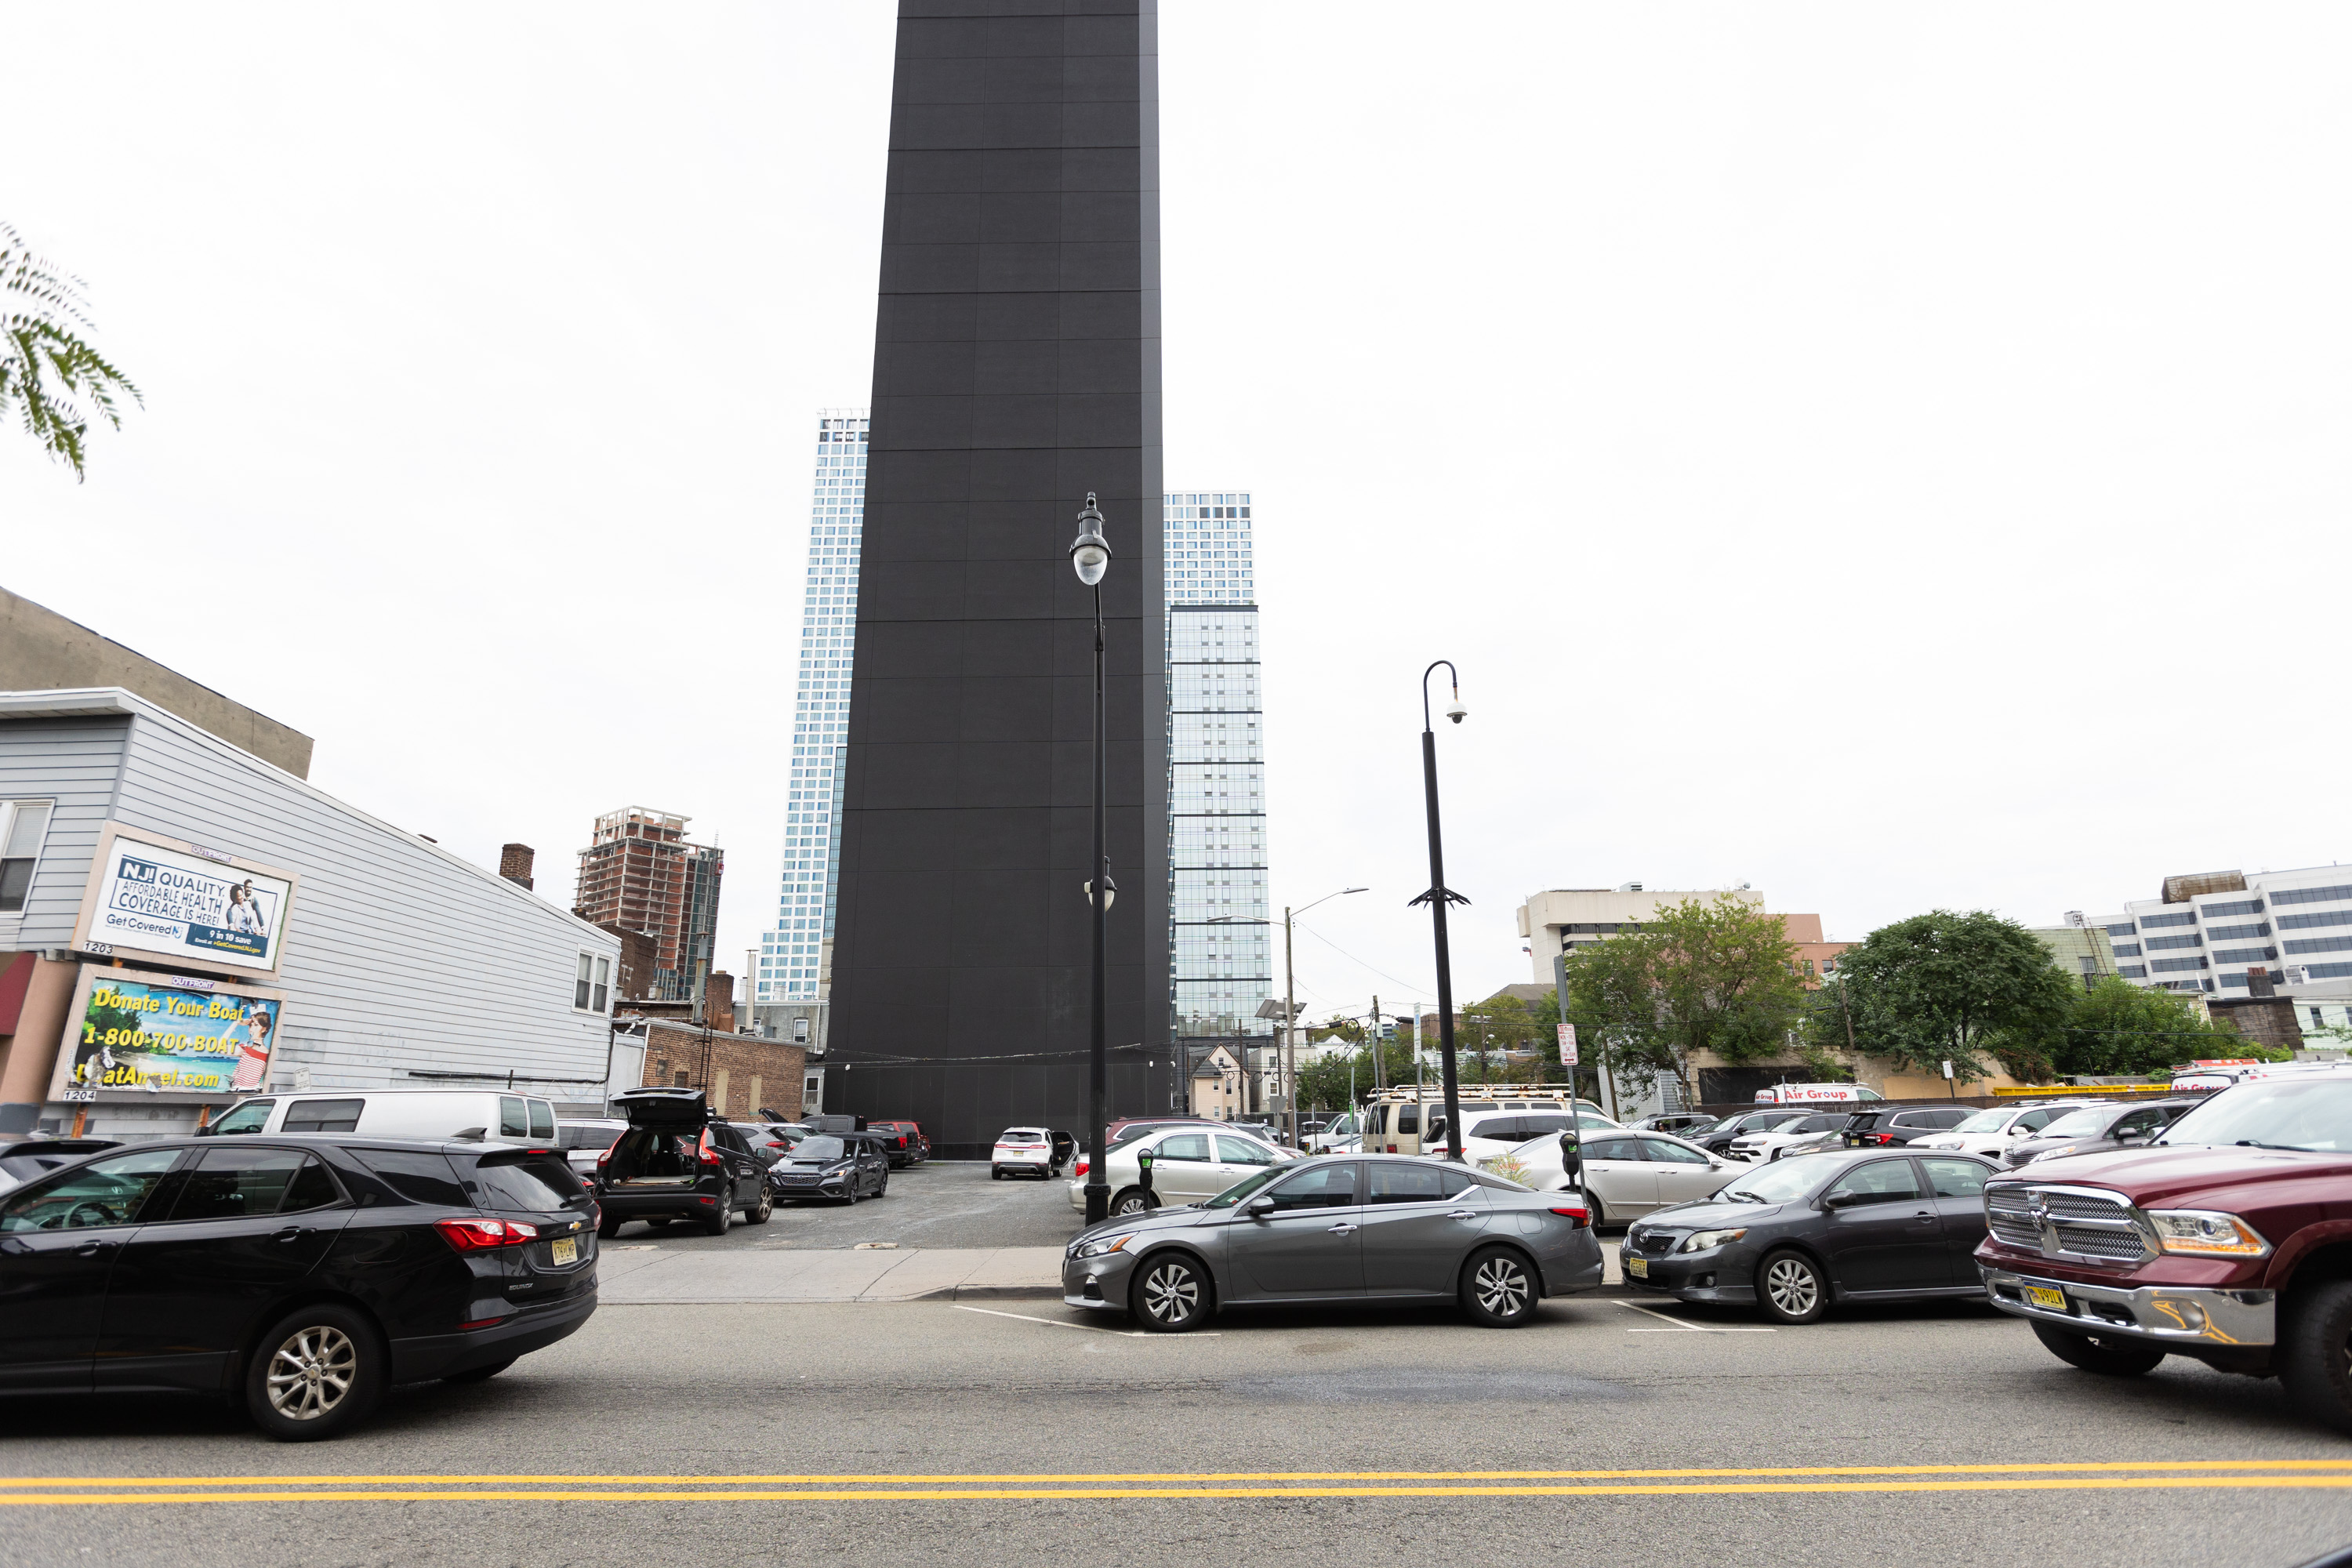 Jersey City's Journal Square Is Making a Comeback, With Residential Towers  - WSJ